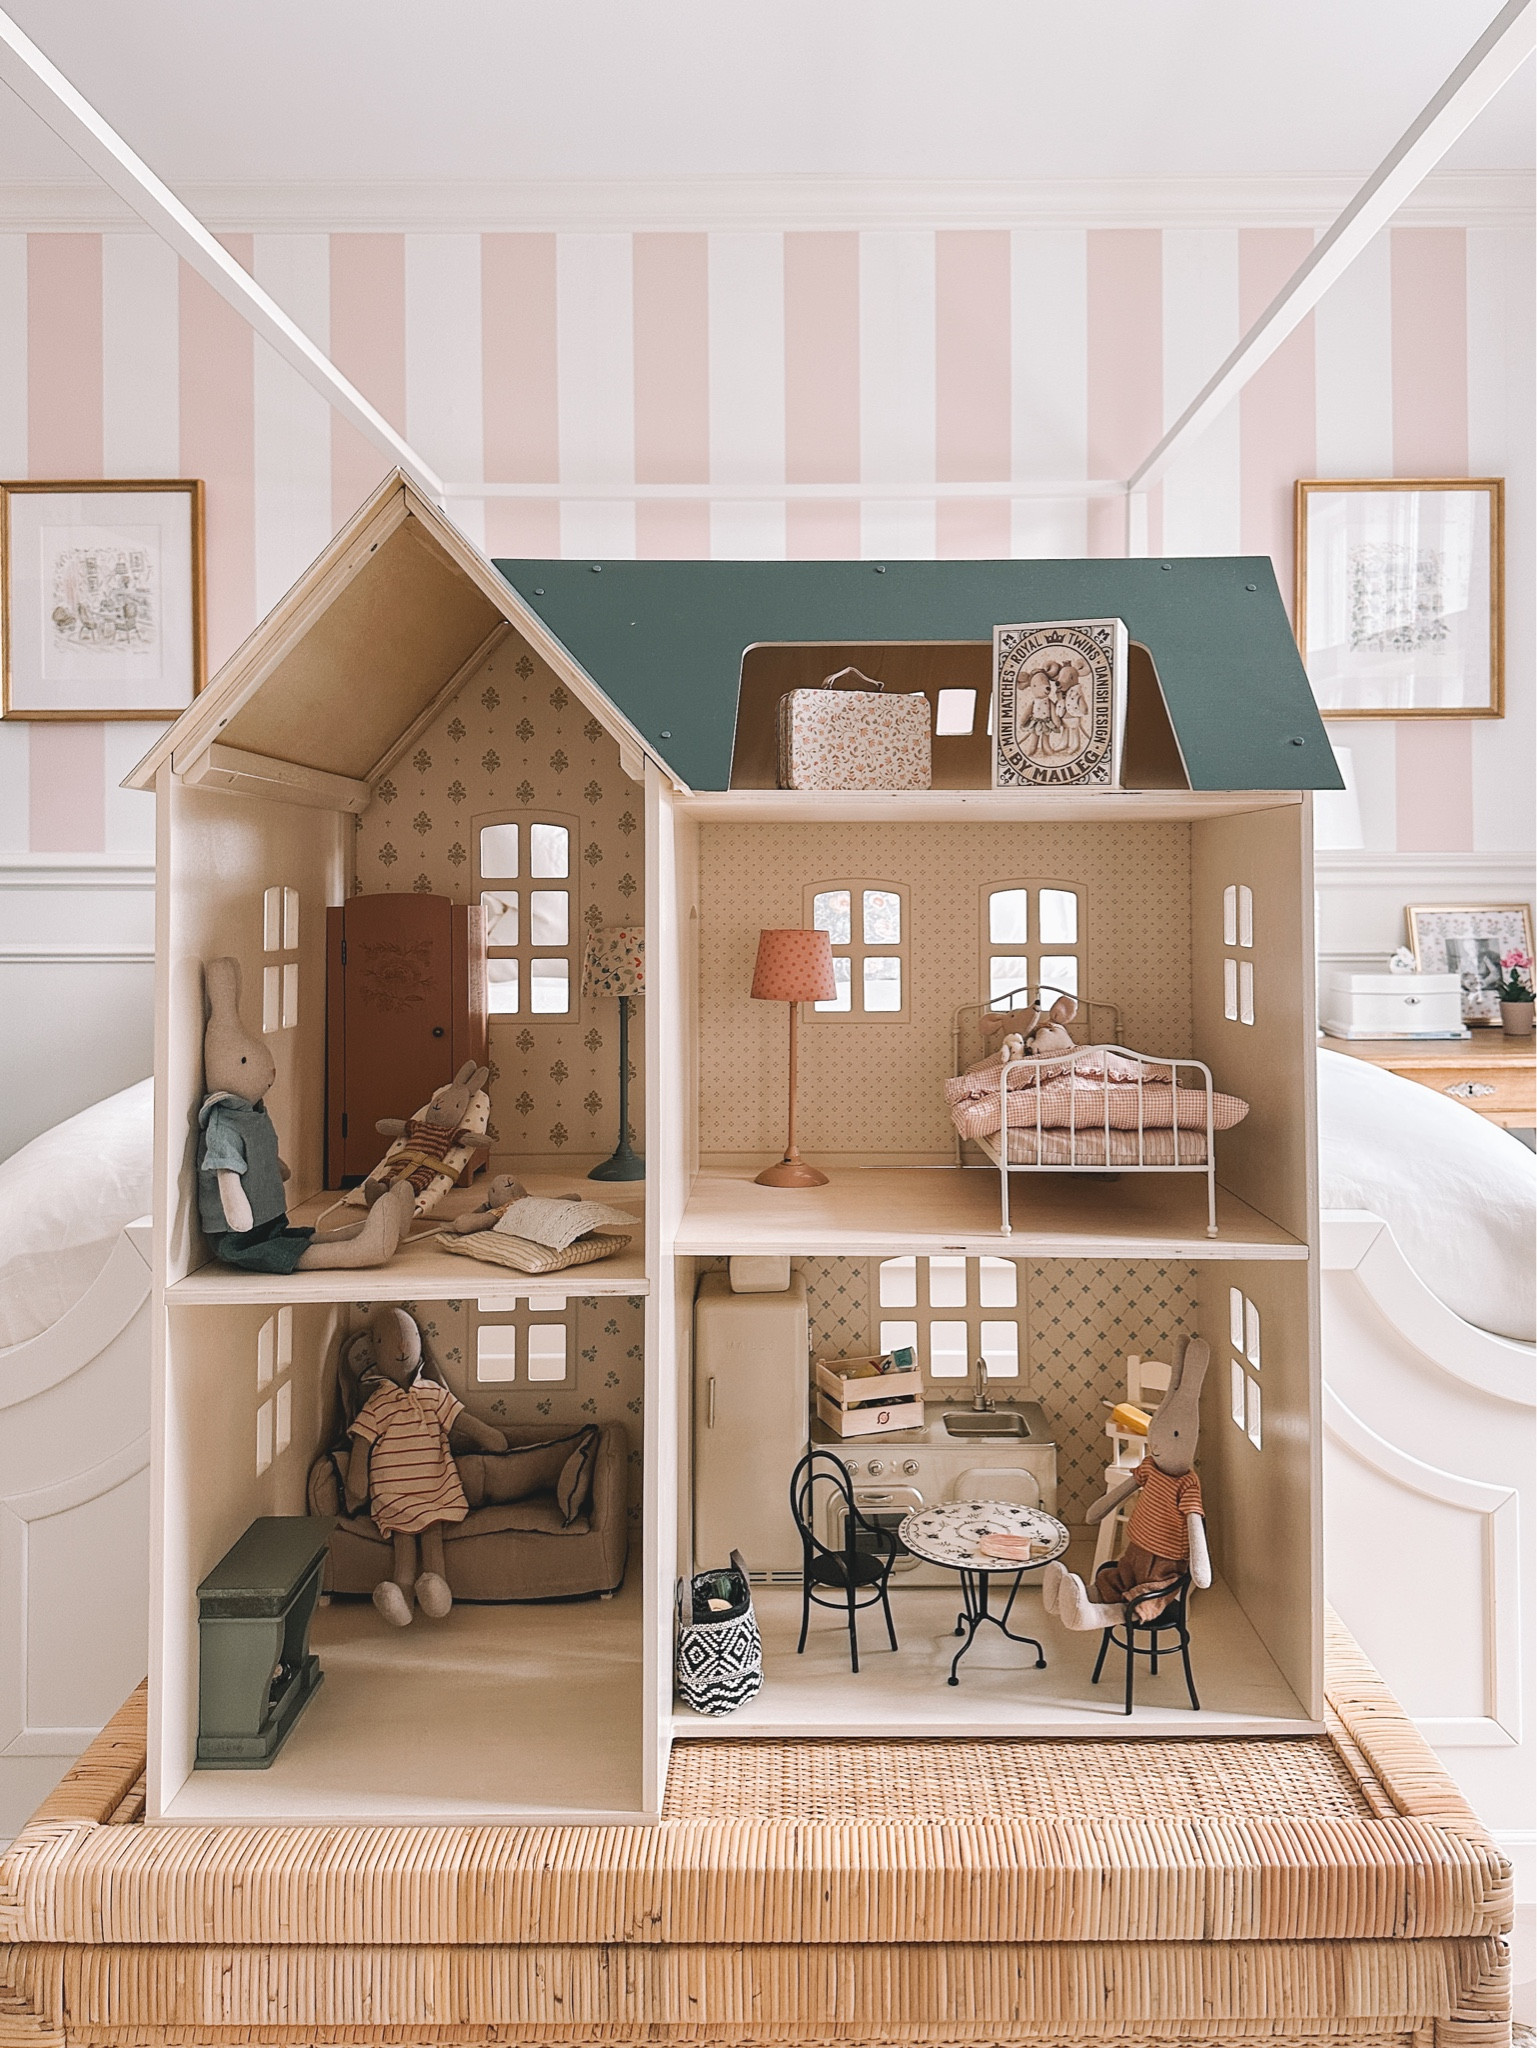 Dollhouse - House of Miniature LTK curated on